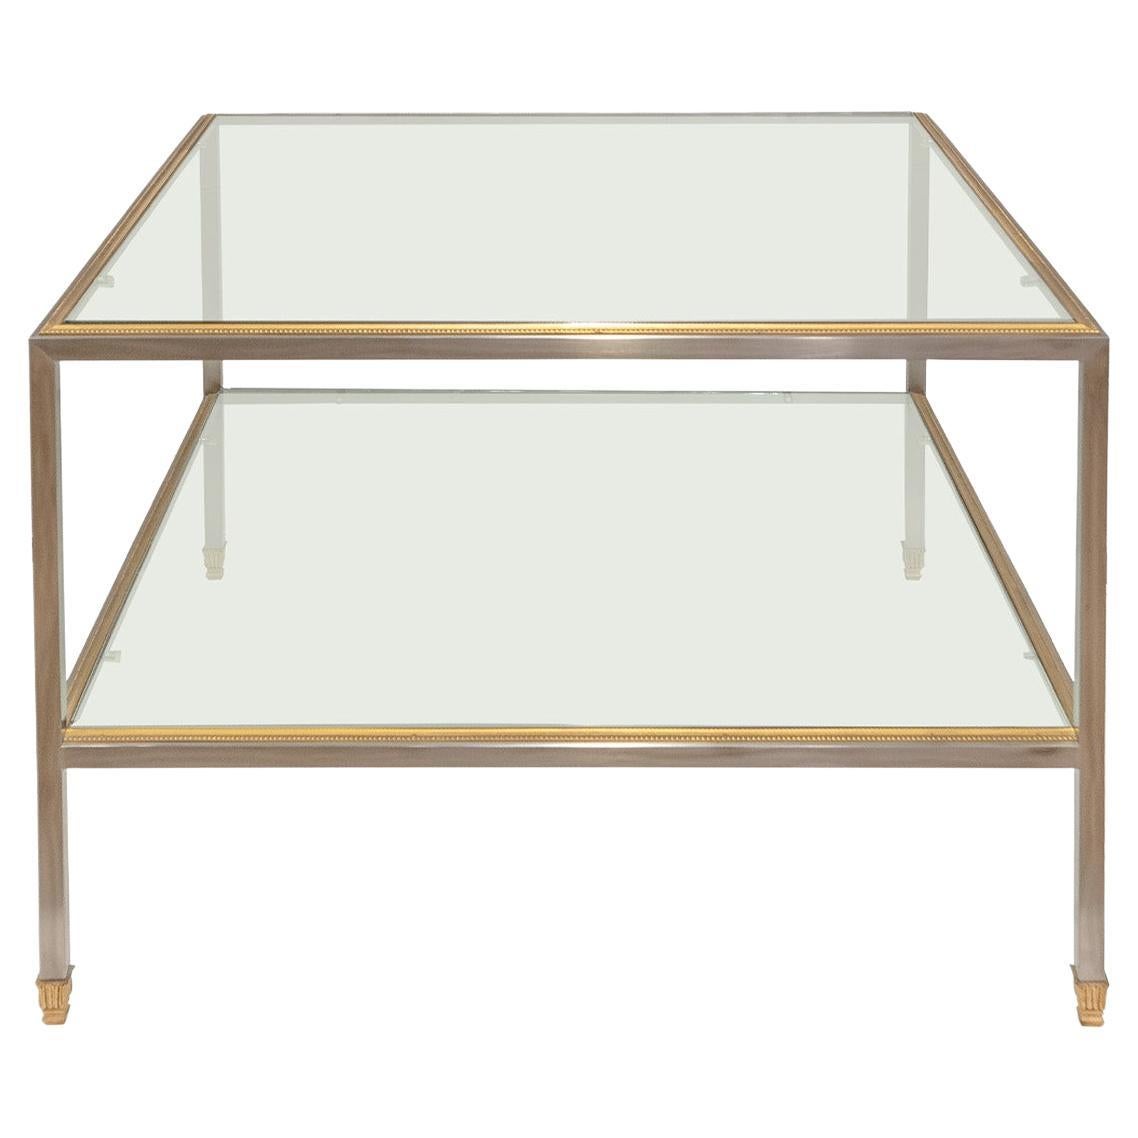 P.E. Guerin Exquisitely Crafted "Steel and Burnished Brass Dore Table" 1982 For Sale